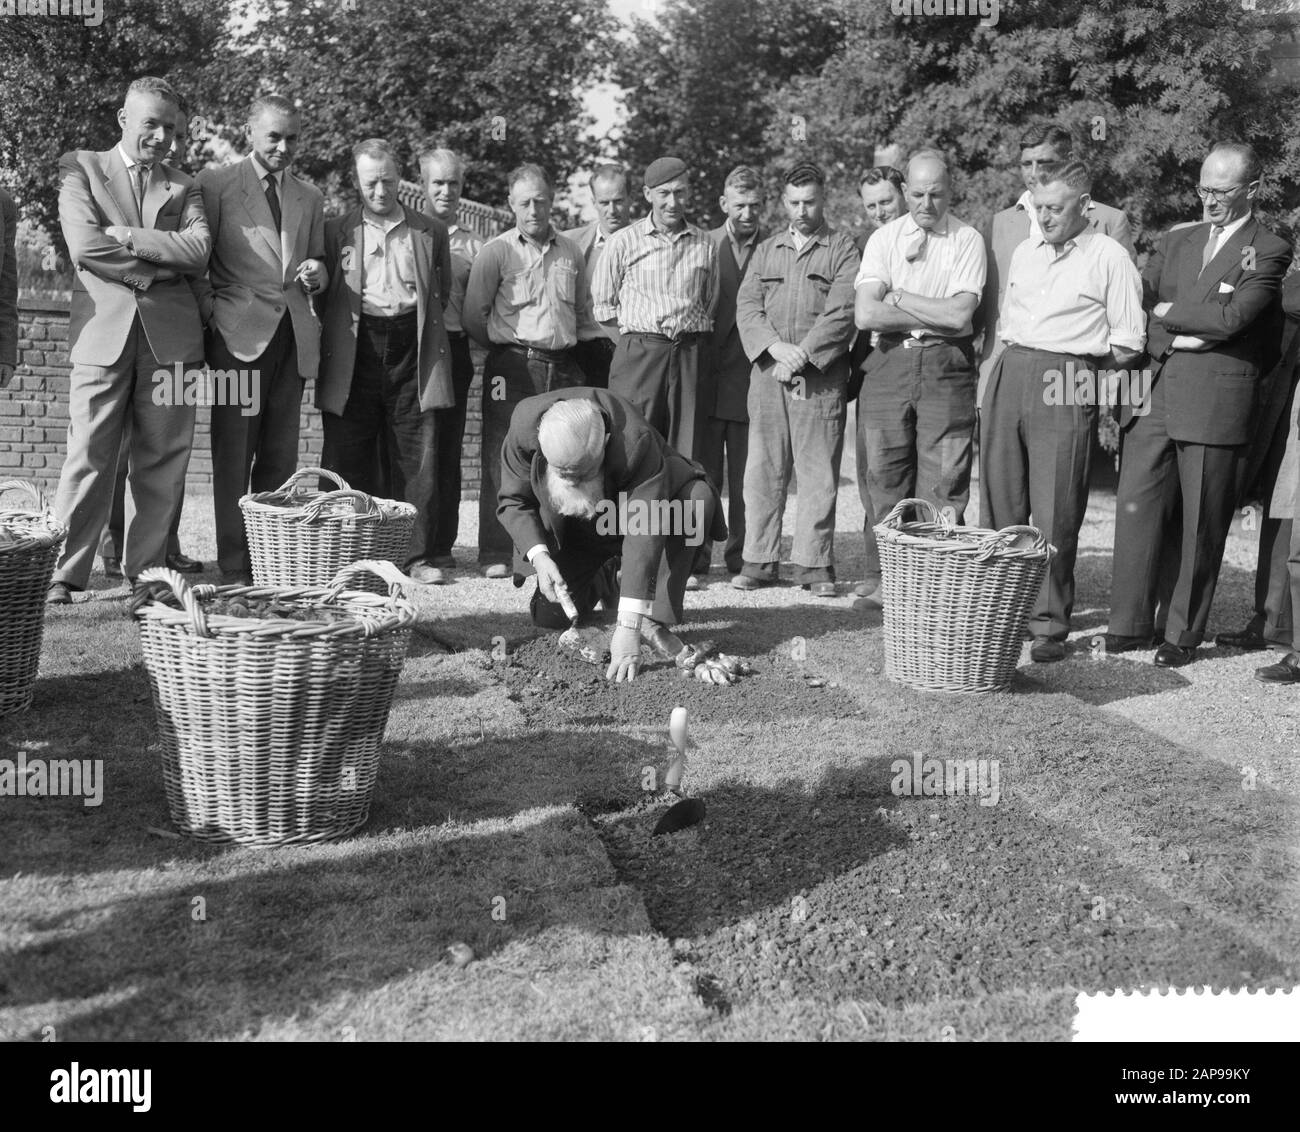 Floriade Rotterdam, 1960 Description: Beginning of planting 1.5 million bulbs for the Floriade at Rotterdam Date: 21 September 1959 Location: Rotterdam, South-Holland Keywords: bulbs, floriades, plants Institution name: Floriade Stock Photo